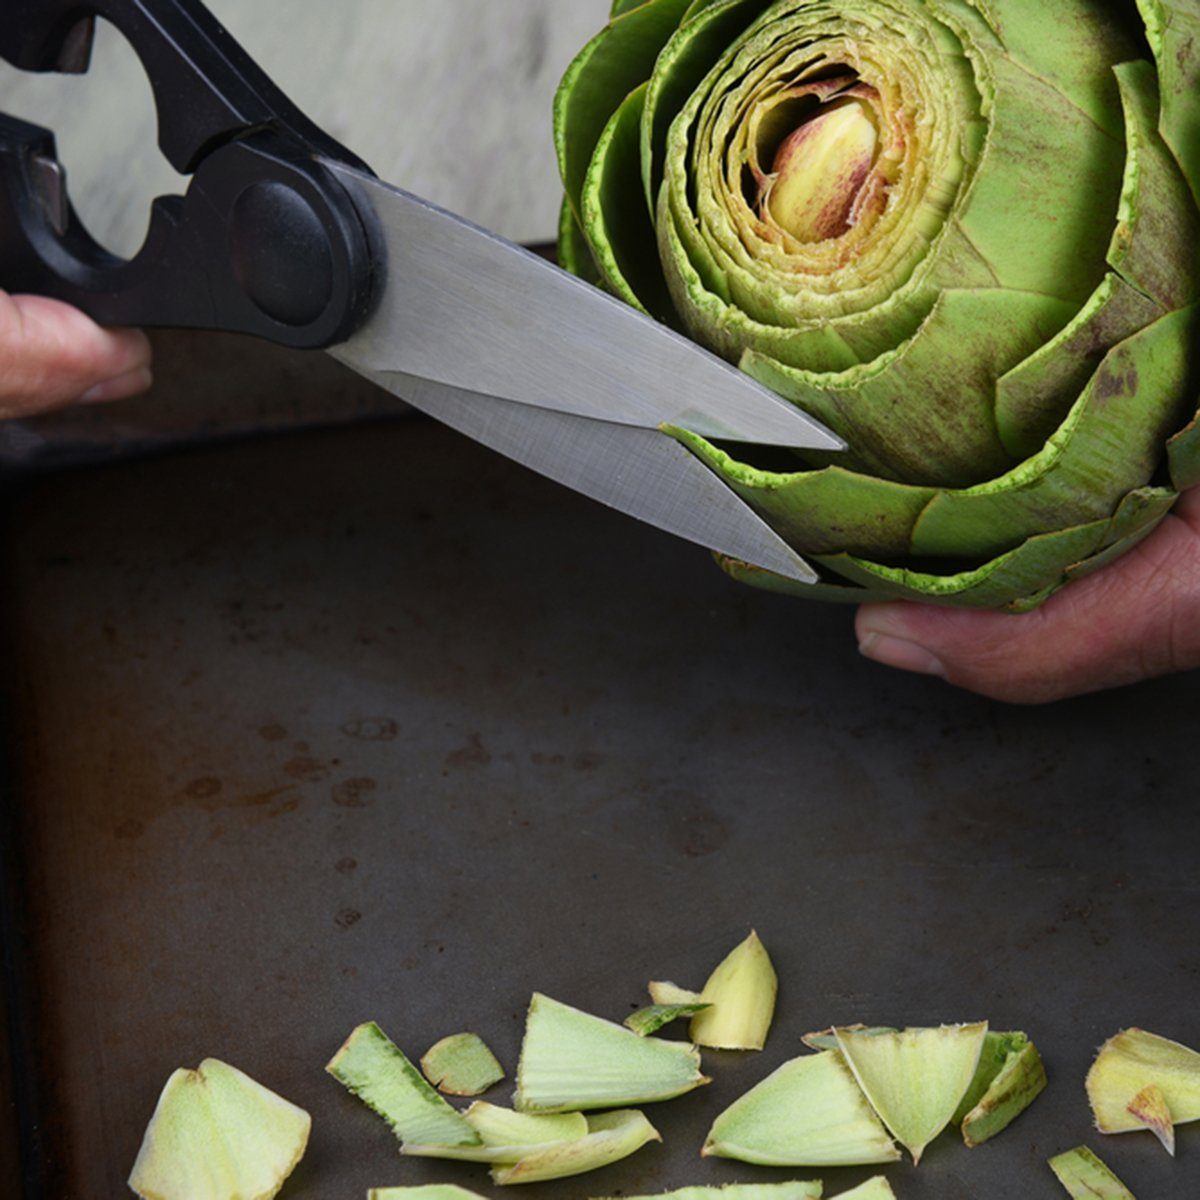 Closeup of a cook using kitchen shears to prepare an artichoke for cooking.